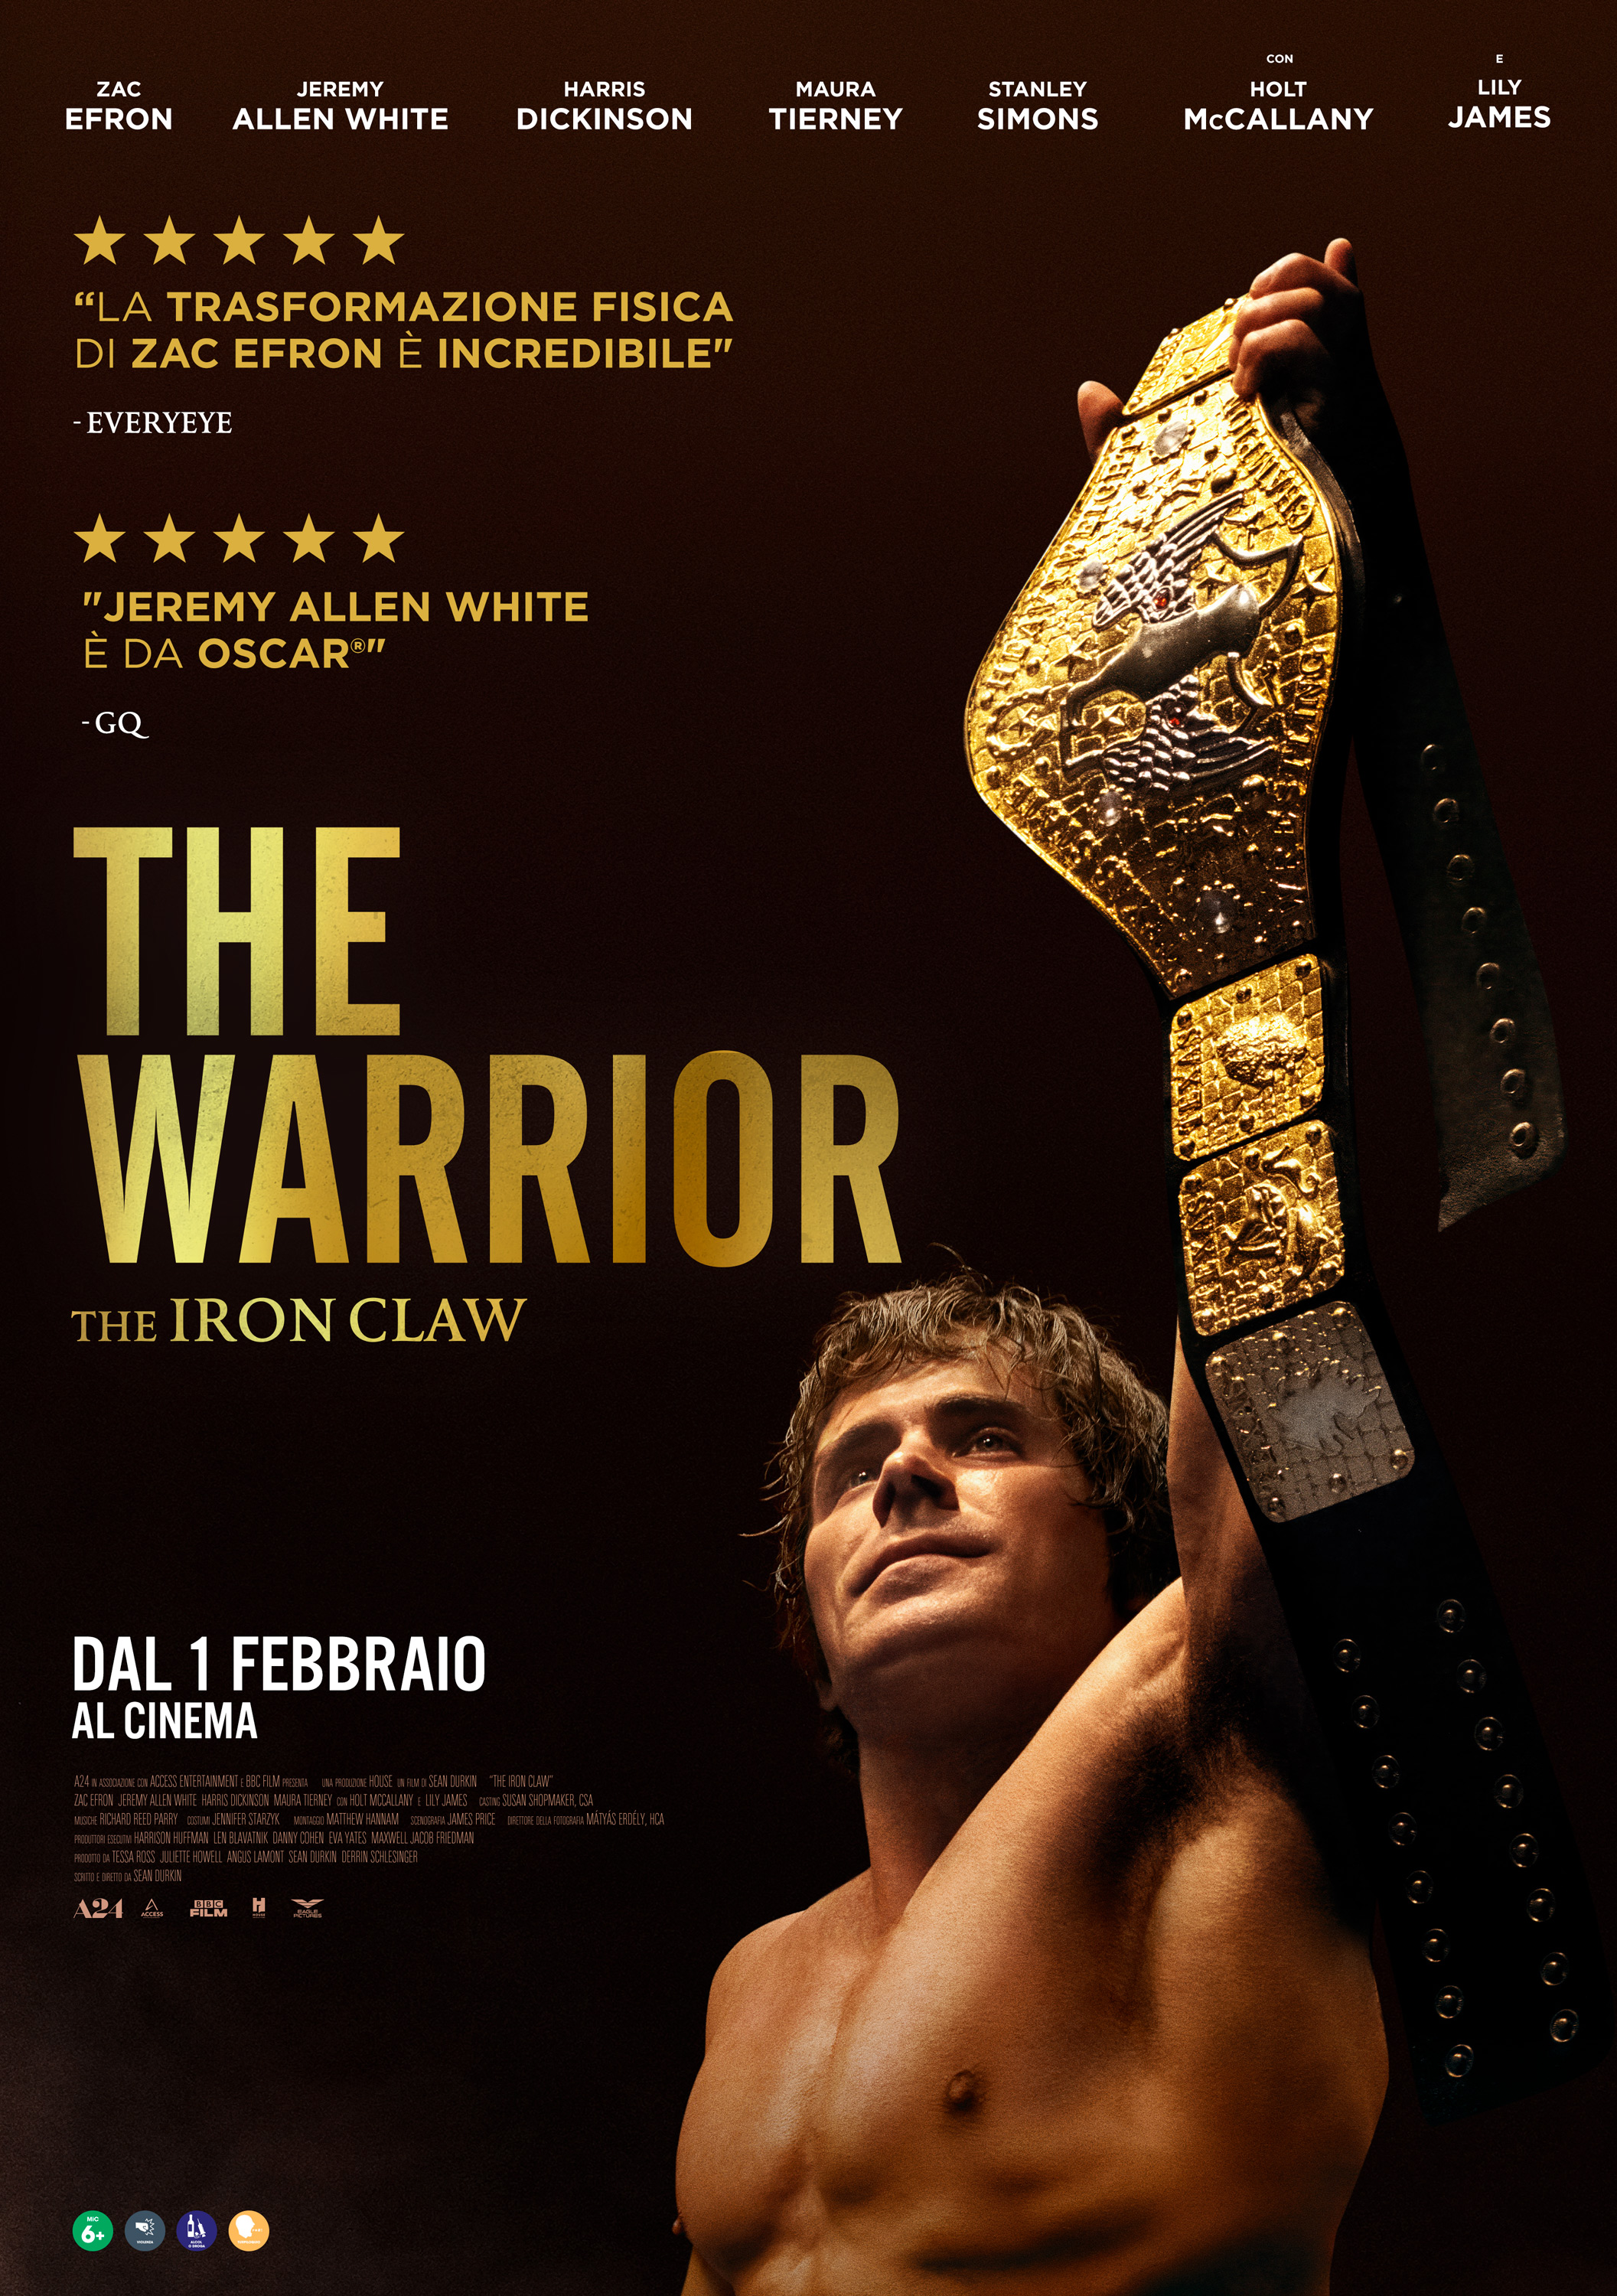 THE WARRIOR - The Iron Claw